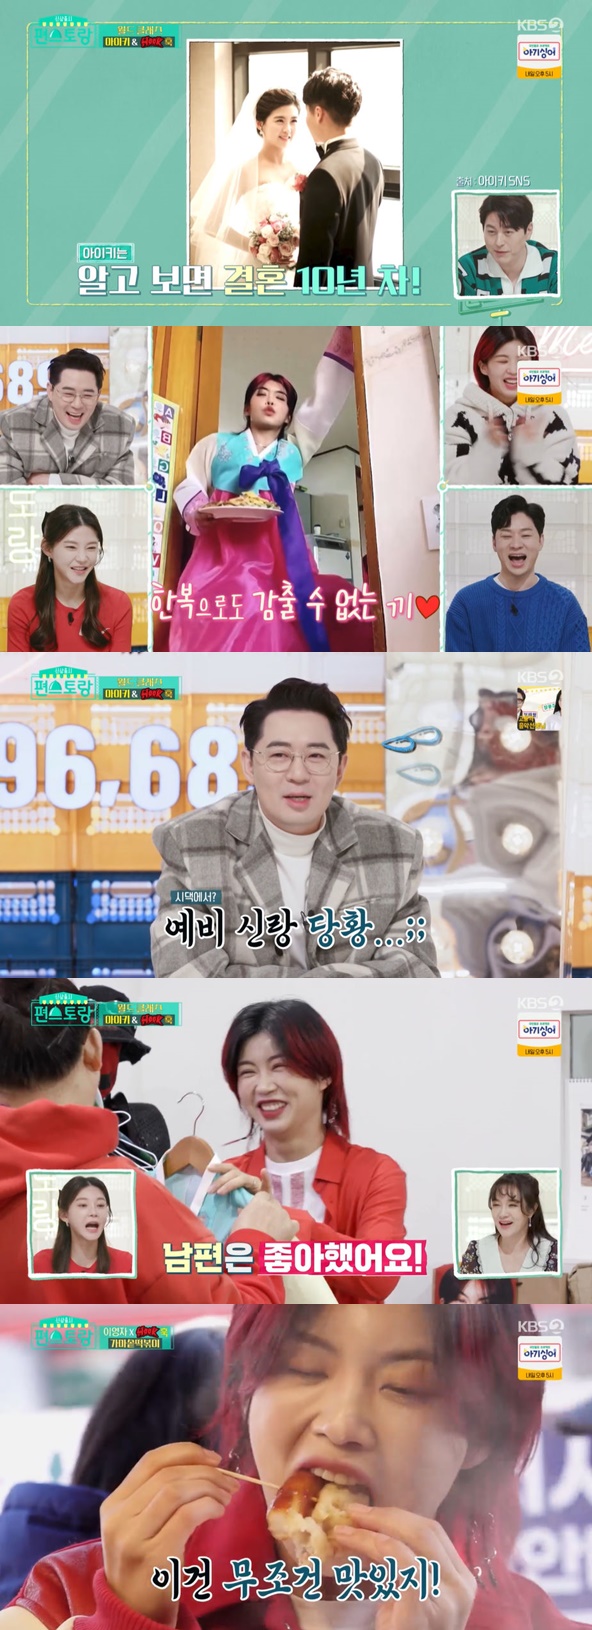 Cha Ye-ryun appeared as a new pyeon chef on KBS 2TV Stars Top Recipe at Fun-Staurant (hereinafter referred to as Stars Top Recipe at Fun-Staurant) broadcast on the 25th.Cha Ye-ryun set out to set up the Morning Man in the Kitchen for the family.Ju Sang Book, who enjoyed a lot of man in the kitchen including Kang Mi-jang kale sambap, and meatballs, was worried about the menu that Cha Ye-ryun would show at Stars Top Recipe at Fun-Staurant.The texts of Cha Ye-ryun and Ju Sang Book were then released; Cha Ye-ryun stored Ju Sang Book as the groom, revealing her affection for her husband.Ju Sang Wook recommended the menu and sent heart emoticons in succession to envious everyone.Cha Ye-ryun said, I contact you like a habit since I was in love. He also spoke to Ju Sang Book during the recording break.Ju Sang Wook recommended fishing stir-fry; in Cha Ye-ryun, who asked for octopus grooming, he was impressed by his silent grooming of 15 octopus.Cha Ye-ryun said her husband is good and added Chen Chu; Lee Young-ja envied, saying she was well married.I wanted to get married quickly, Cha Ye-ryun said, and early on my family lived apart; I dreamed of my family talking in front of Man in the Kitchen.I am happy to eat delicious food and eat with my loved ones. Meanwhile, Lee Young-ja headed to the stretch of the dance practice room at Aiki; Lee Young-ja, who met Aiki, followed the dance moves Aiki showed in Swoopa.Aiki responded by showing the dance of aid, adding: I was dancing because of Aiki.Among the numerous stage costumes, Aiki introduced the hanbok in see-through material, which he explained was ten years old as a clothes I bought during my honeymoon.Then, Aiki, who is dancing sexy in hanbok, was revealed; Boom asked, Is it your in-laws (where the footage was filmed)? and Aiki replied, Yes, embarrassing the boom.Lee Young-ja asked, Are you wearing this in front of adults? So Aiki said, My grandmother was angry, and she said, I am Yashishida.My husband liked it, he added, making the whole group furious.Lee Young-ja went on a taste tour of Eunpyeong-gu with Aiki and members of his dance crew Hook (HOOK).Aiki, who tasted cauldron tteokbokki, showed Tteok-tuk, which put fried and tteokbokki on the bar, and stimulated all the salivary glands.Photo = KBS 2TV broadcast screen